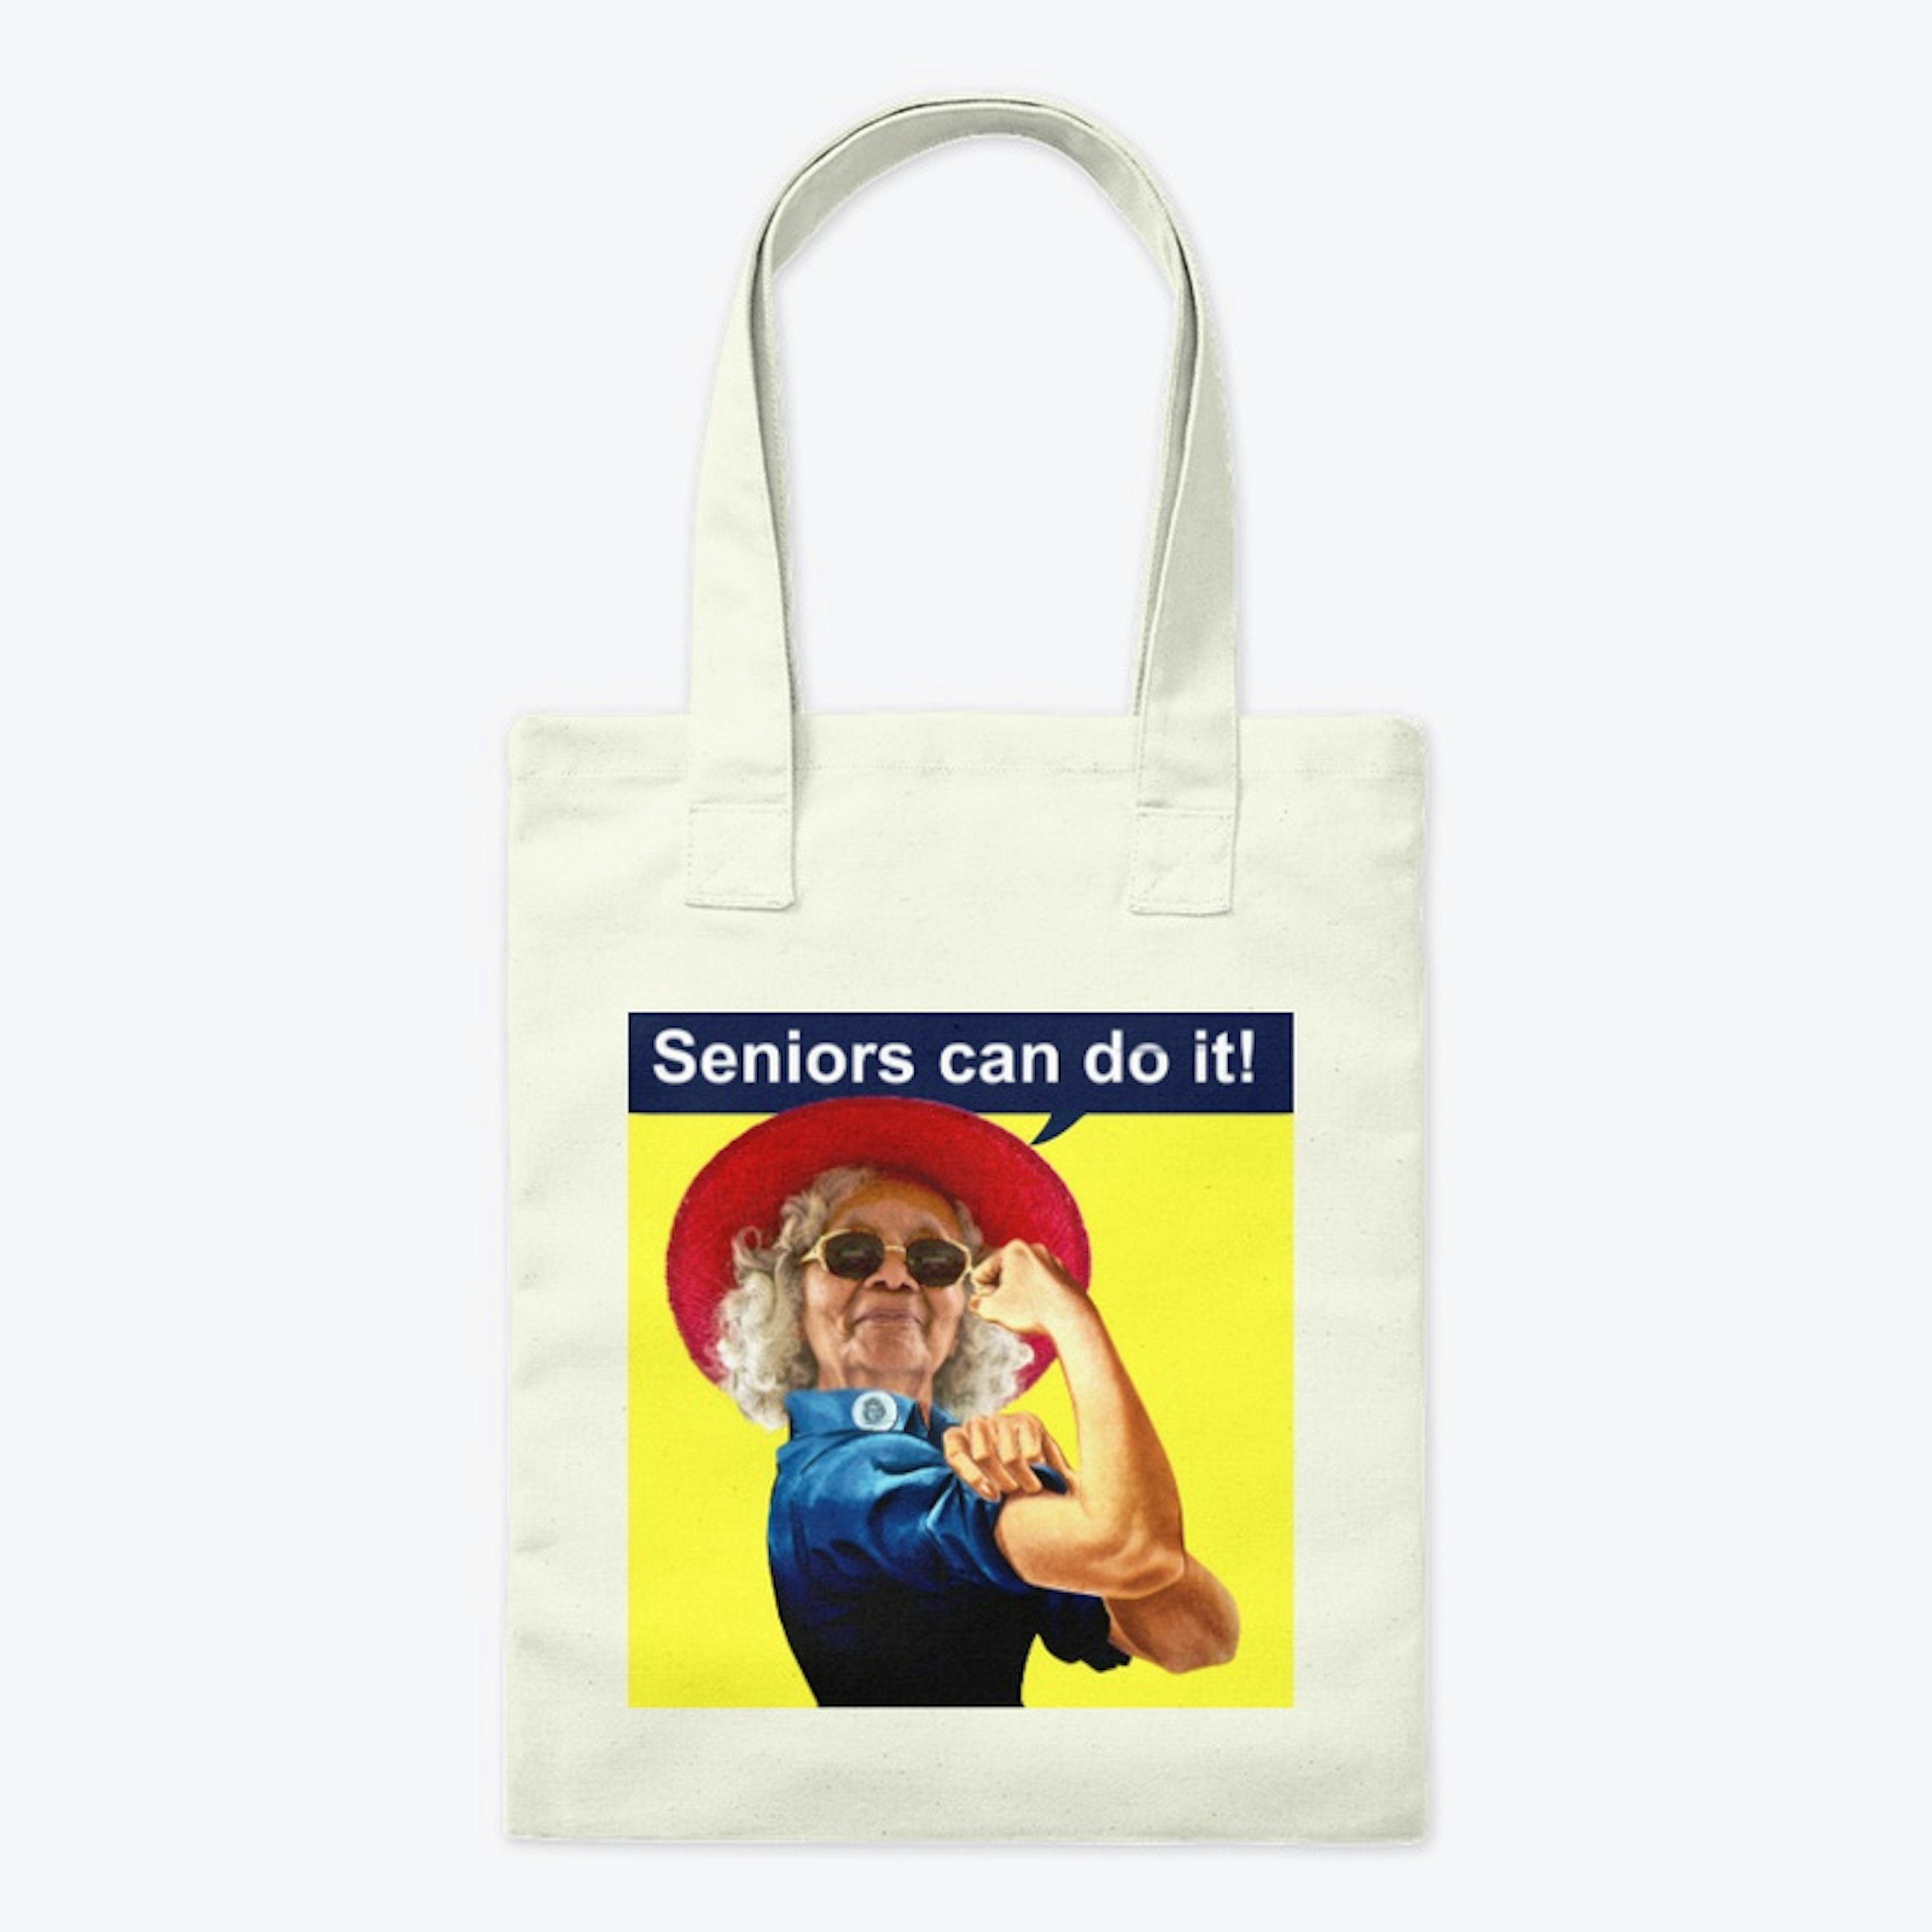 Senior's Can Do It!